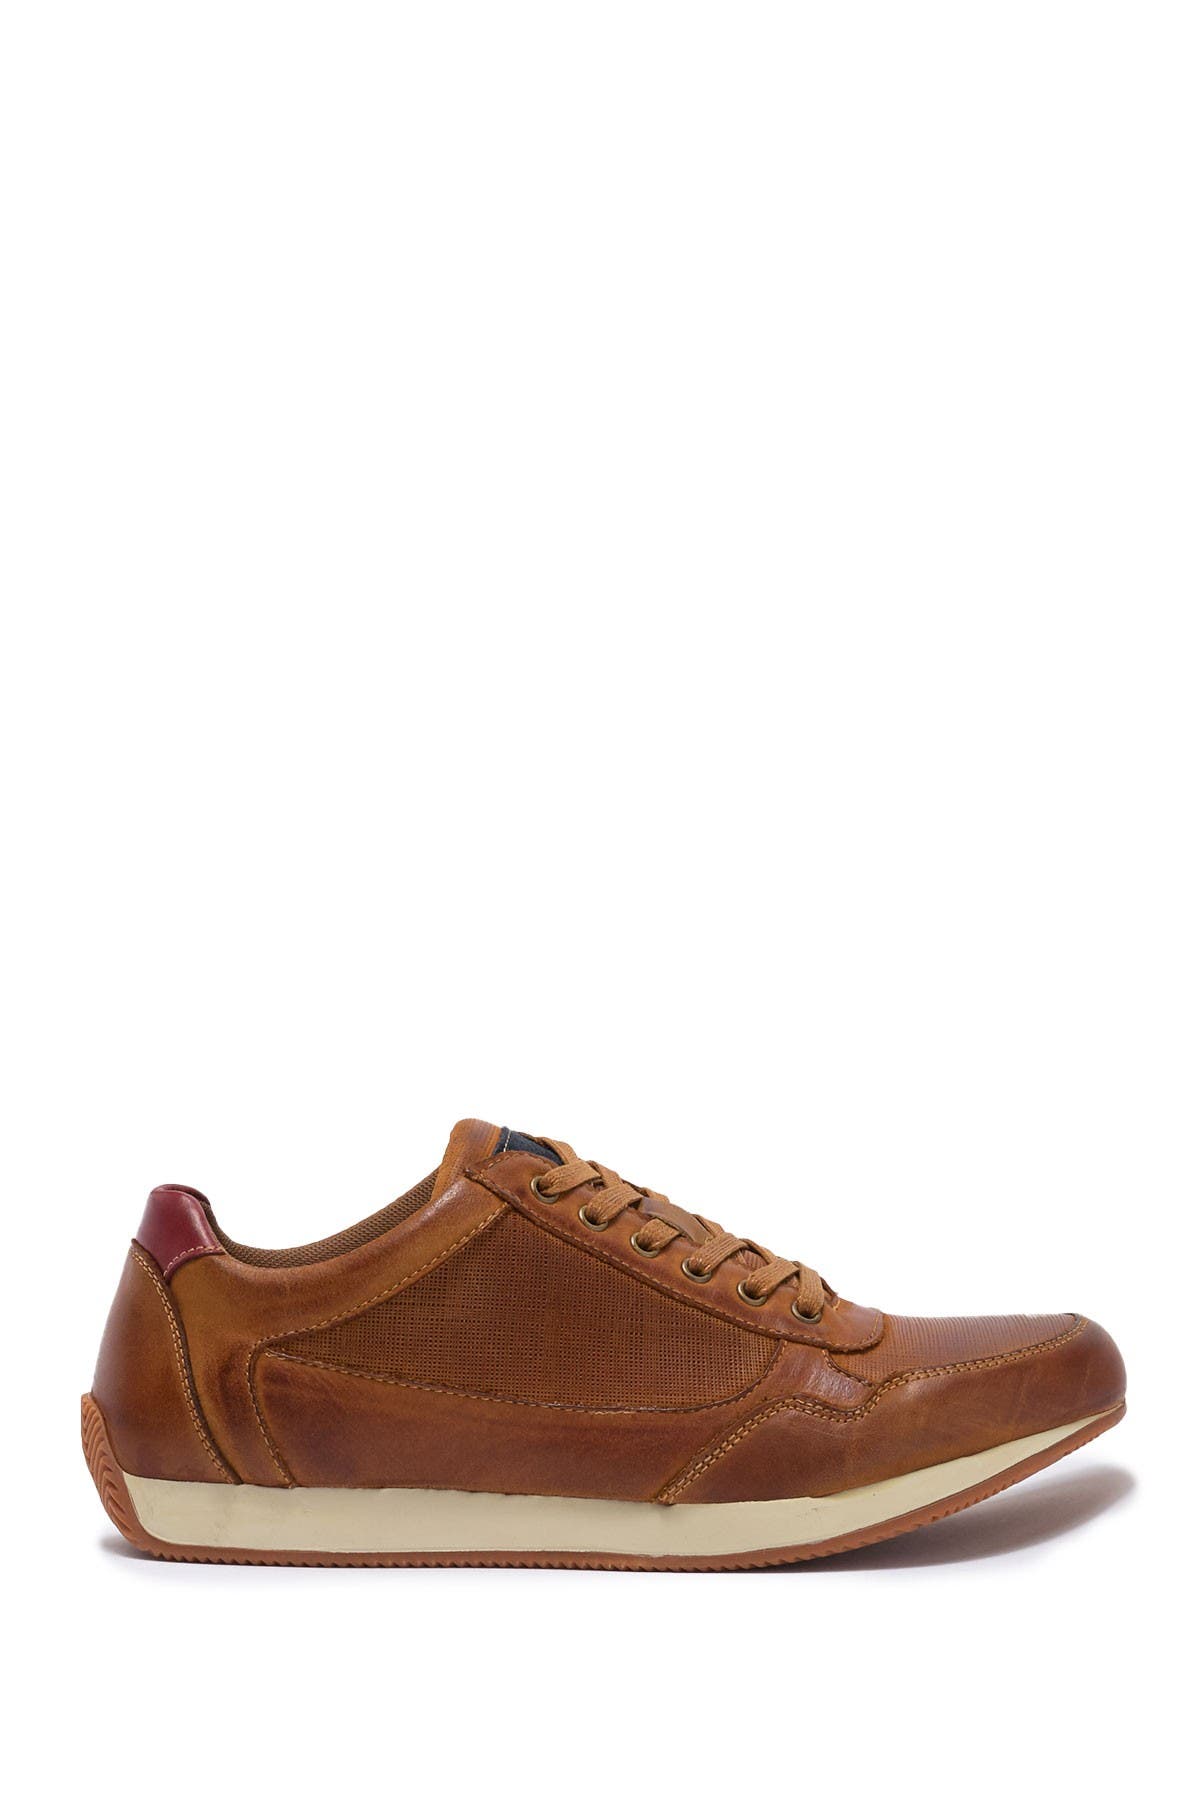 English Laundry | Bradley Lace-Up Sneaker | Nordstrom Rack